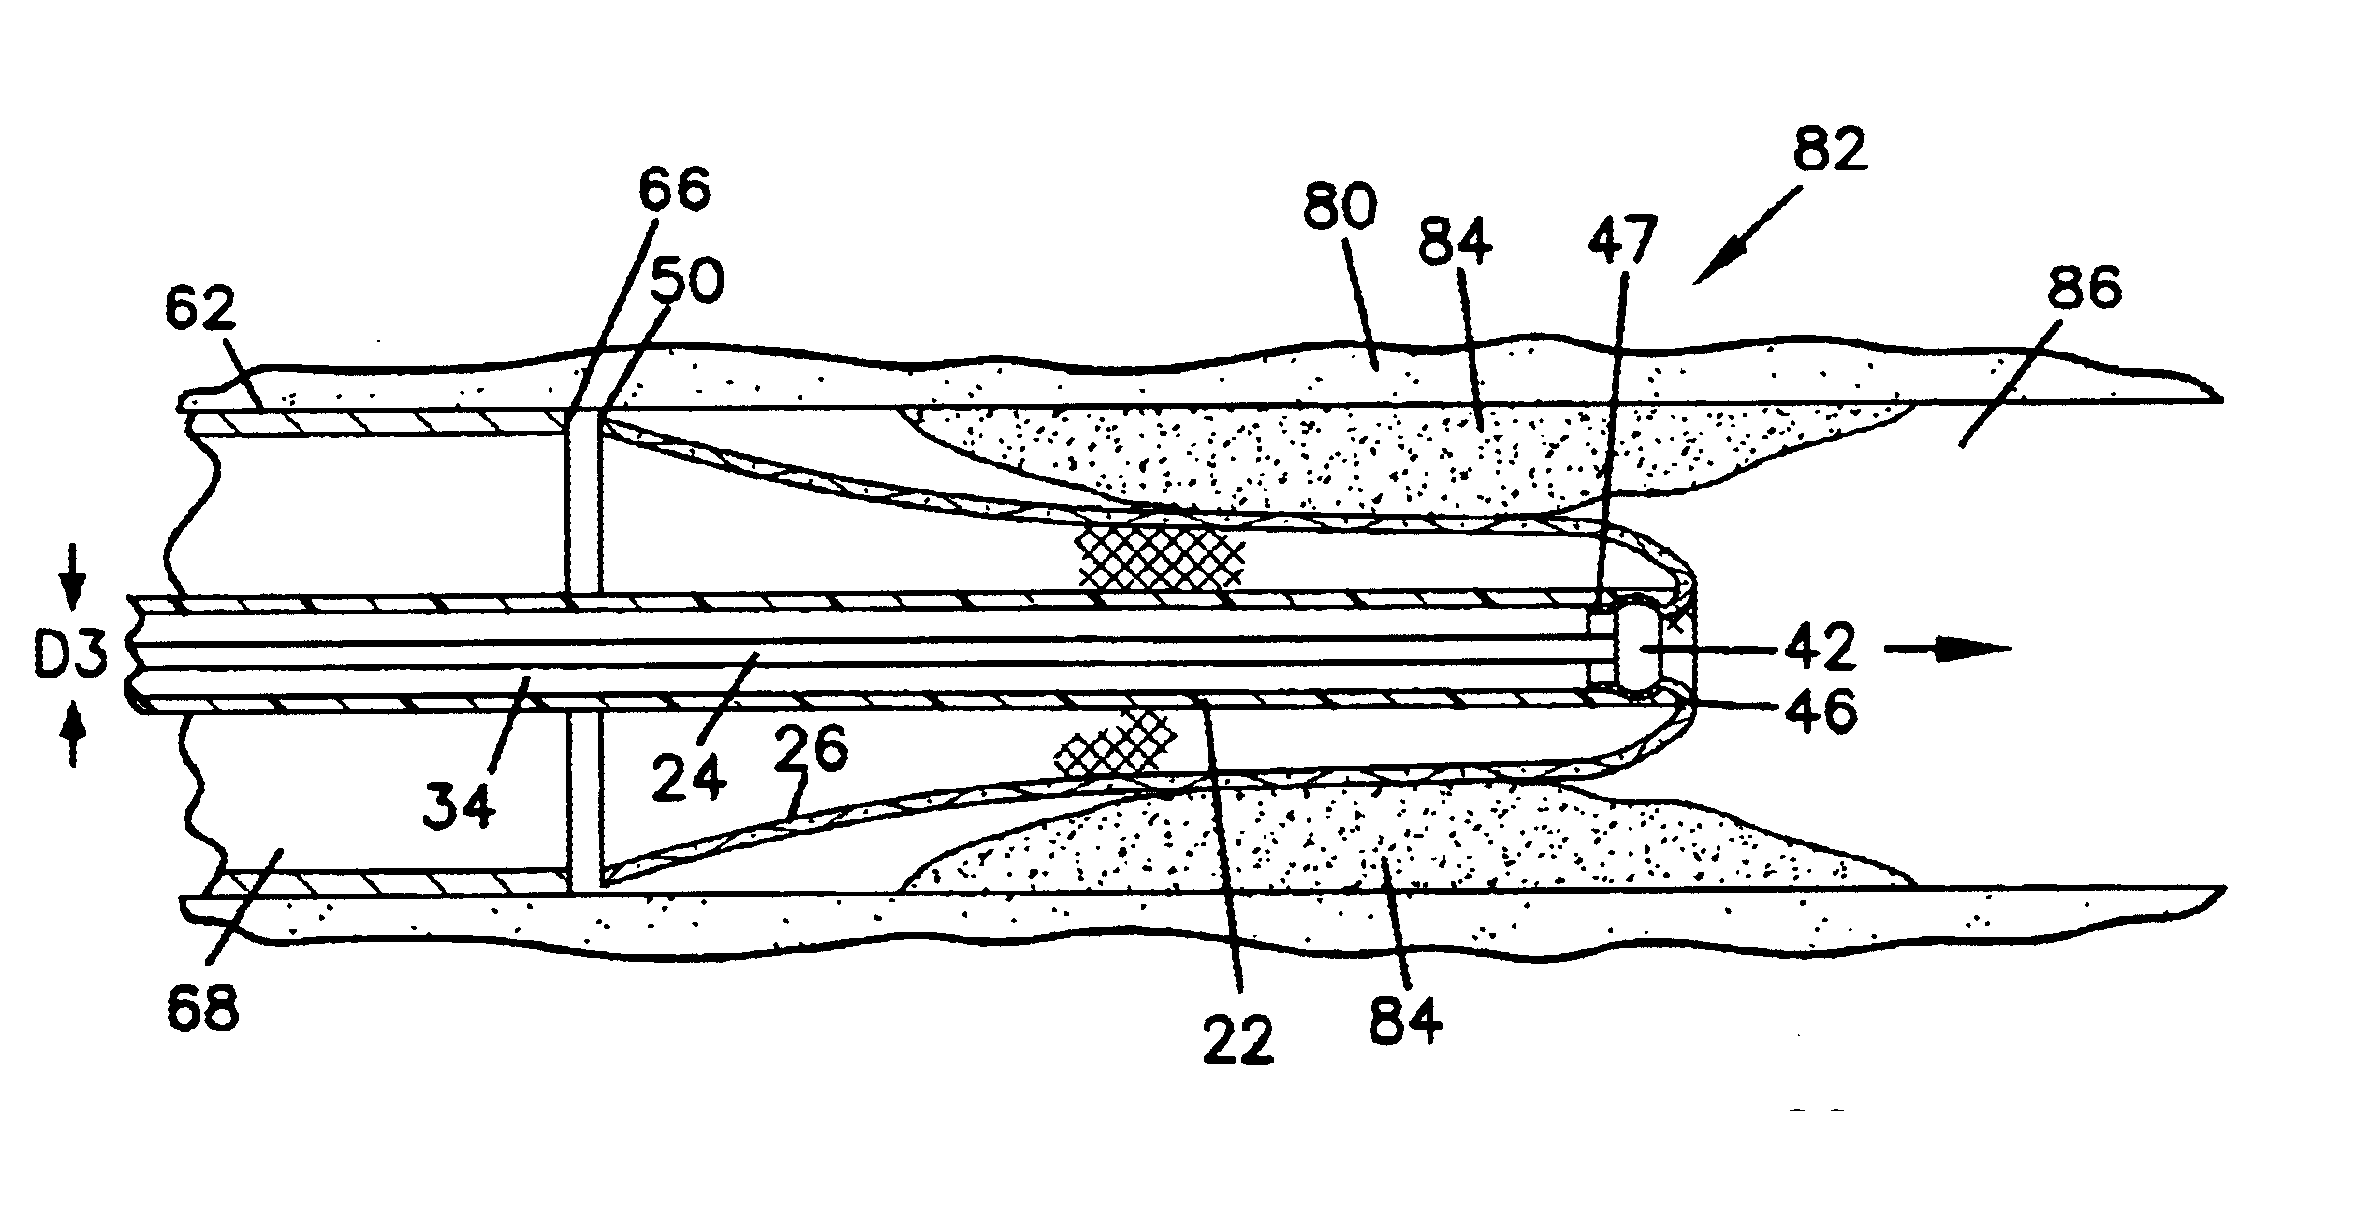 Everting stent and stent delivery system